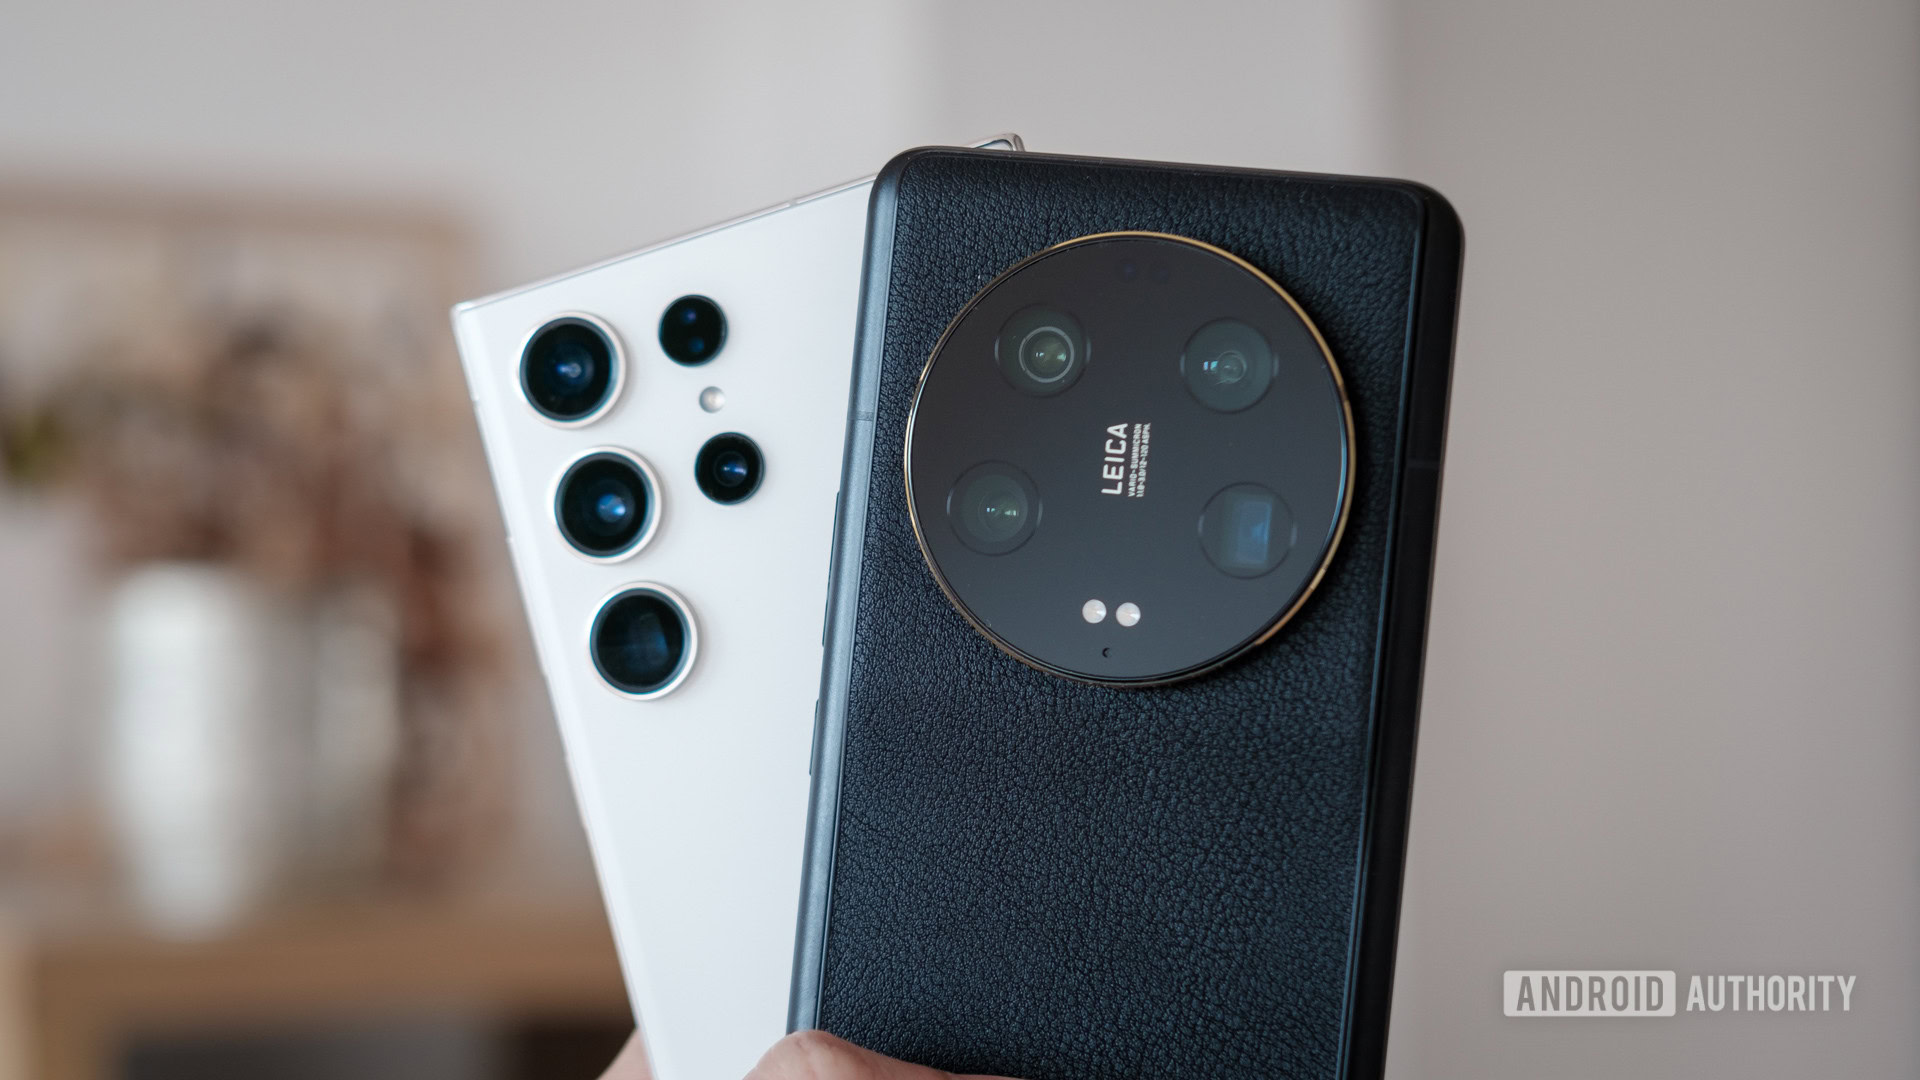 Xiaomi 13 Ultra: White professional photography kit arrives with